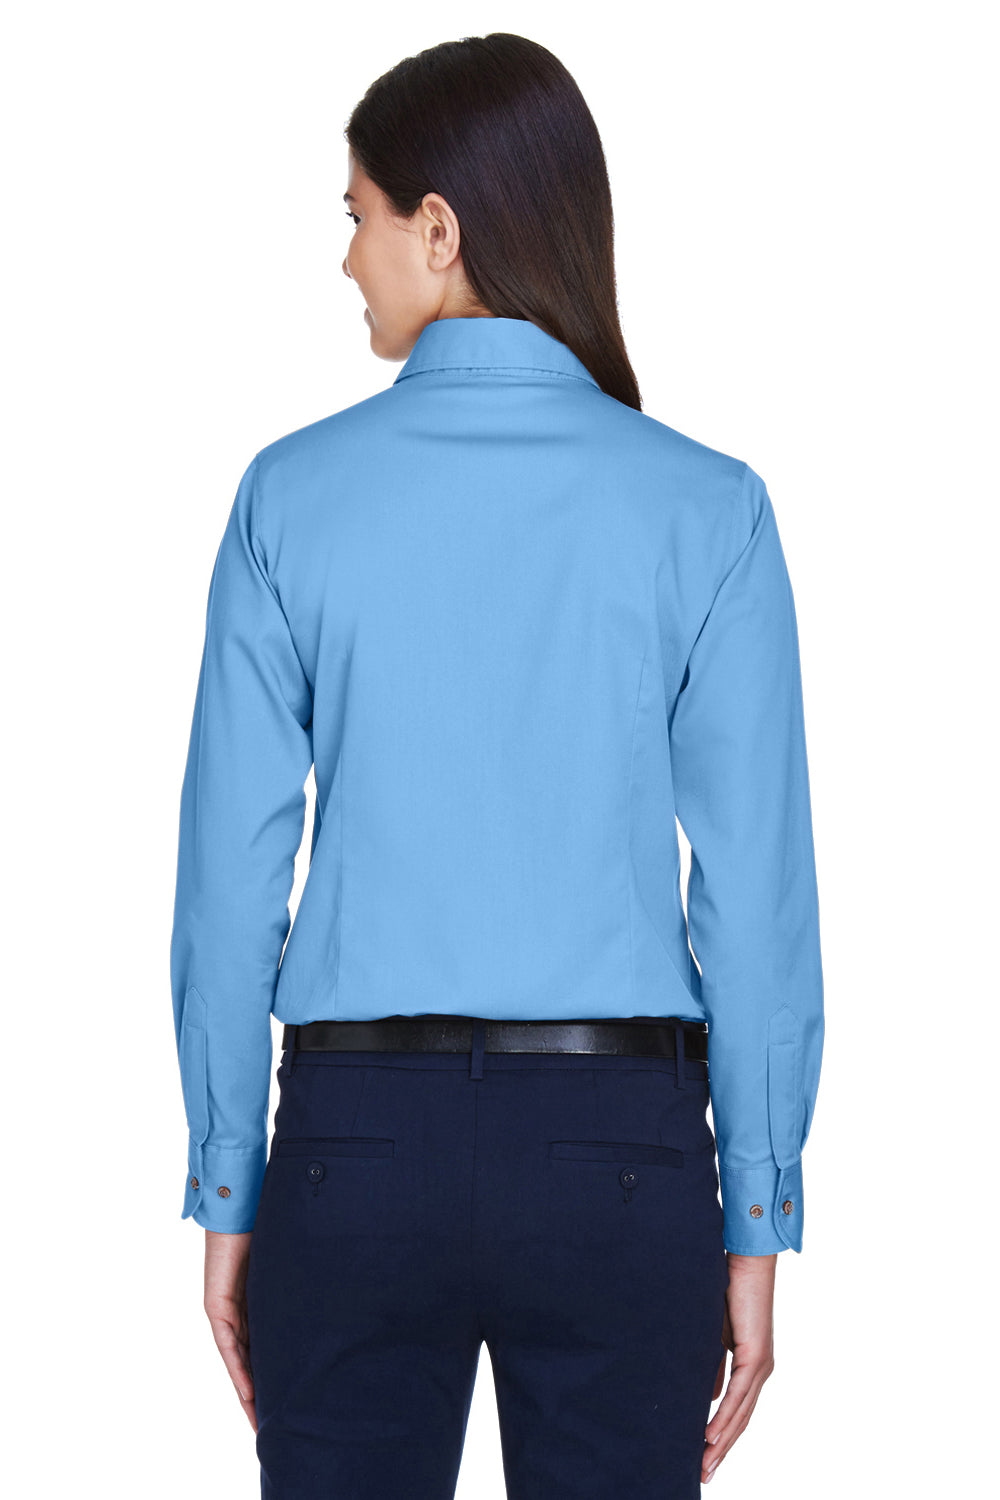 Harriton M500W Womens Wrinkle Resistant Long Sleeve Button Down Shirt Light College Blue Back